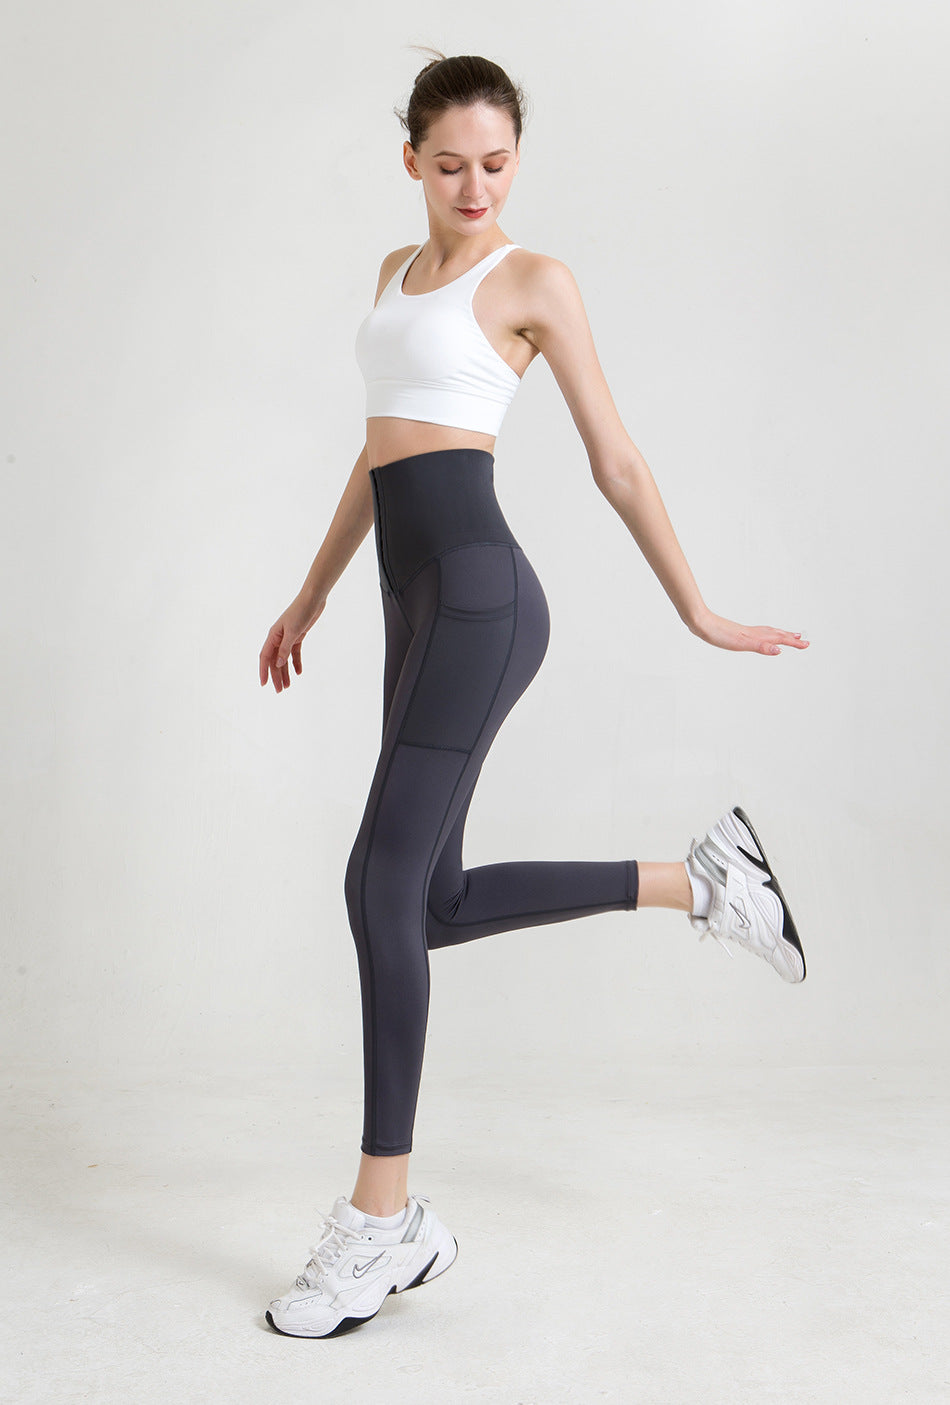 Belly Contraction High Waist Yoga Pants Activewear Sports Leggings Sports Pants malbusaat.co.uk